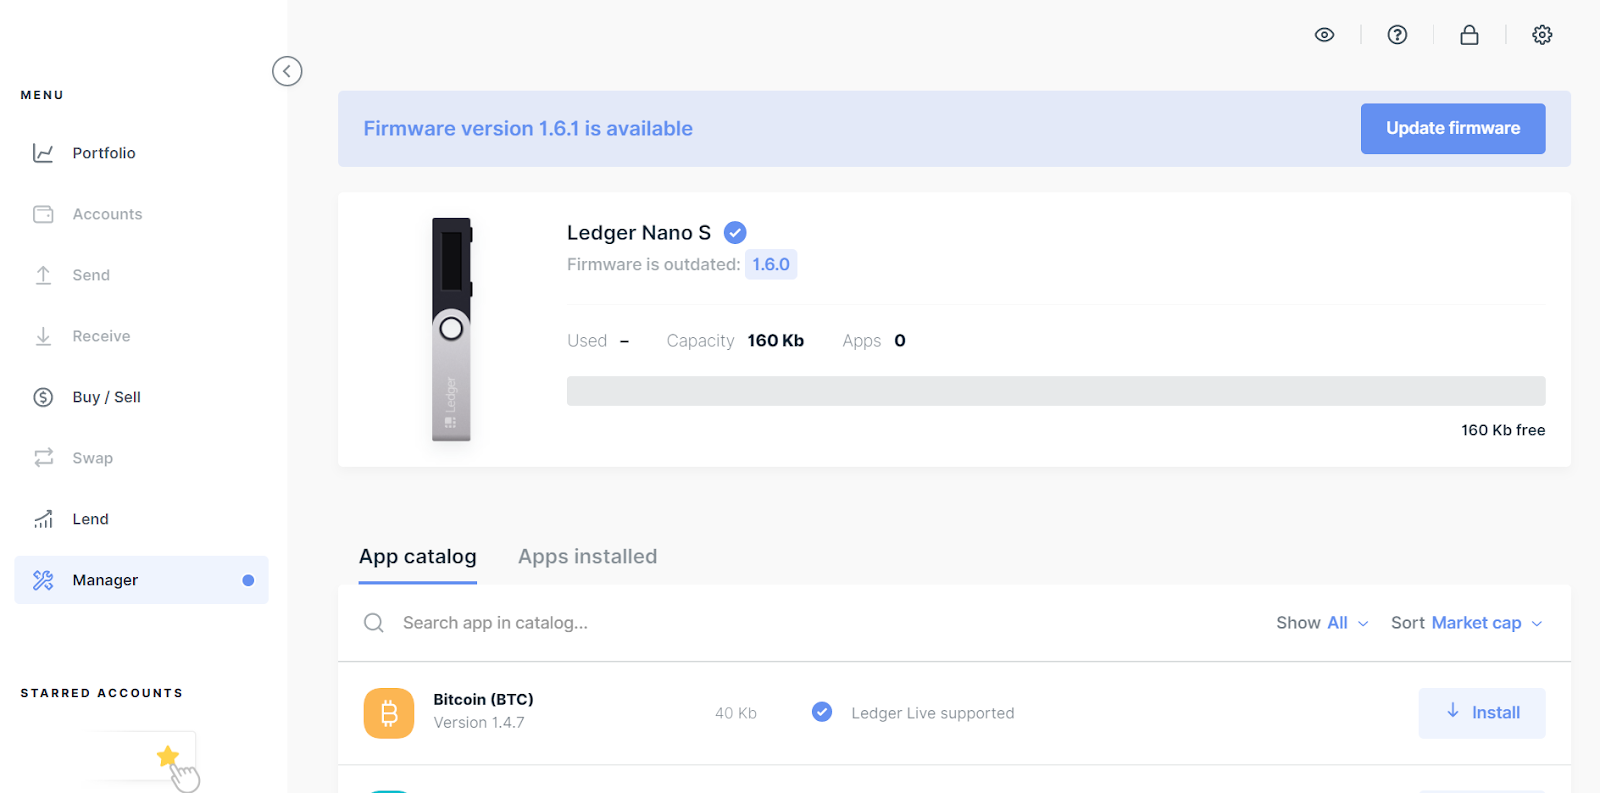 How to update Ledger Nano S firmware